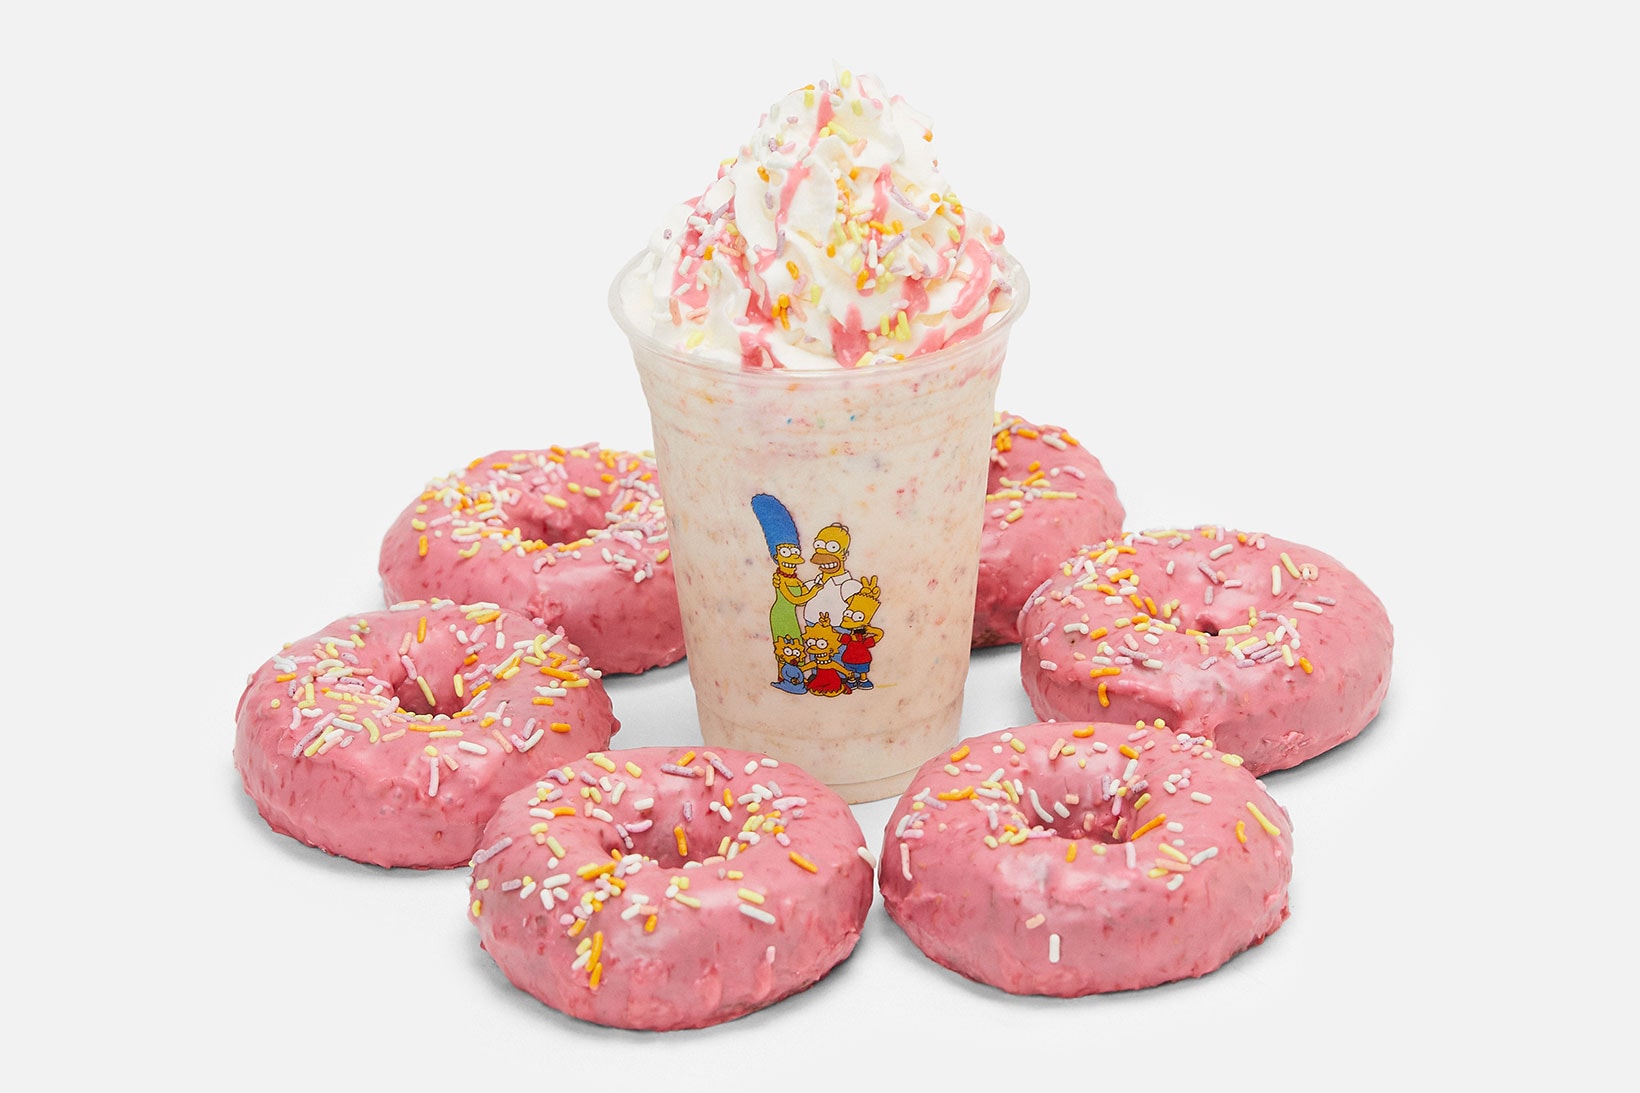 the simpsons kith collaboration pink donuts treats sweets dessert snacks ice cream